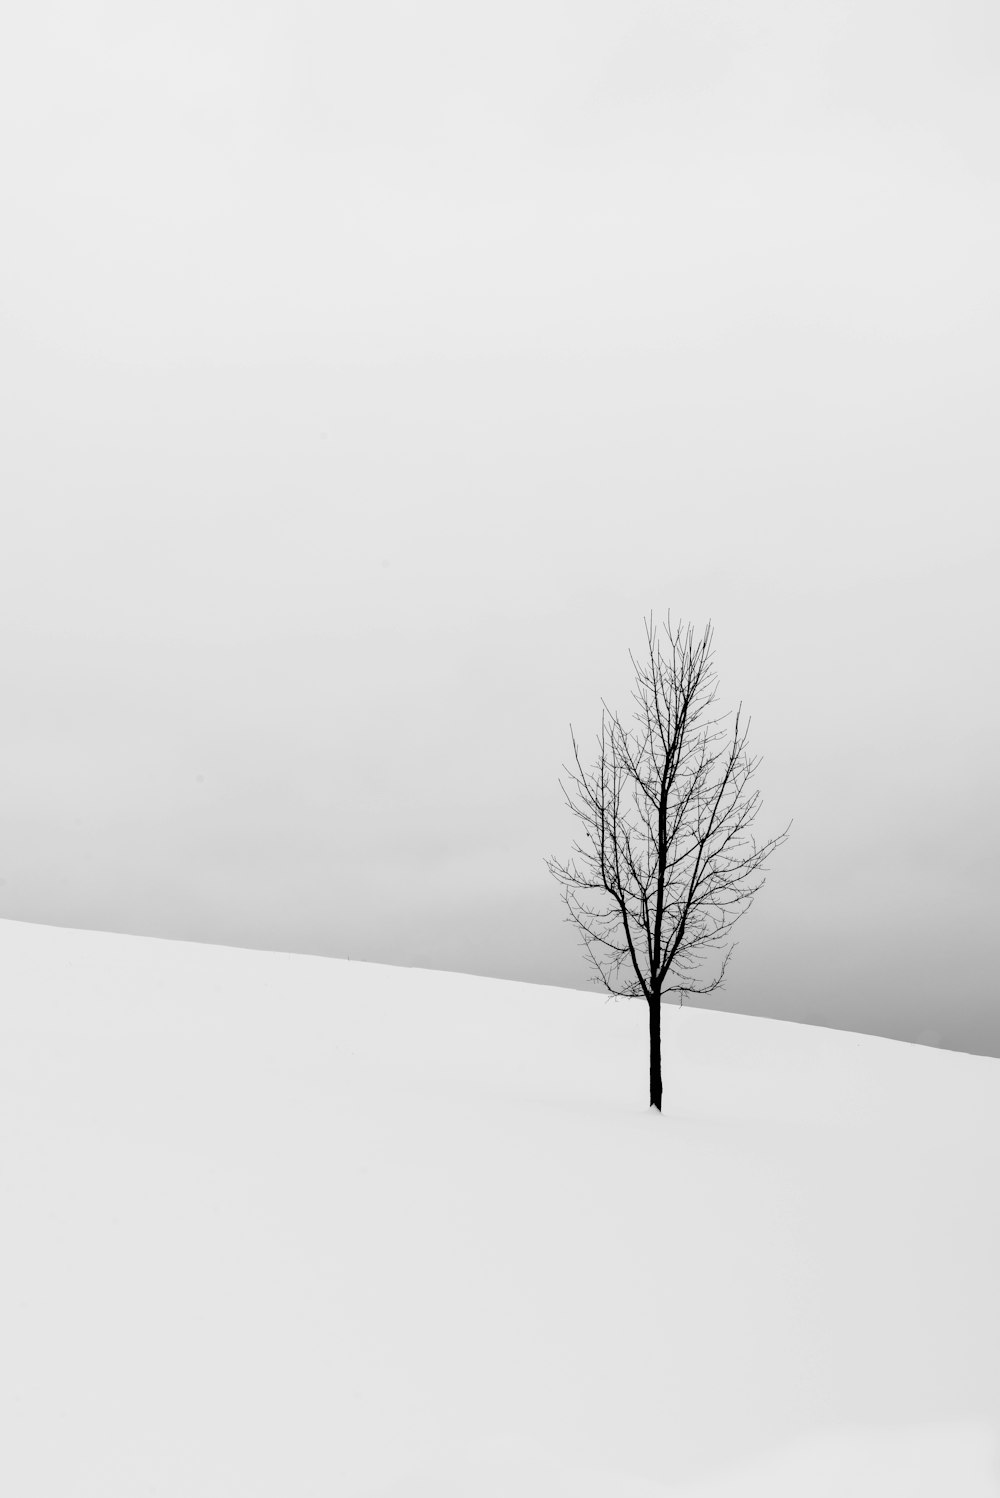 bare tree in middle of snowy field